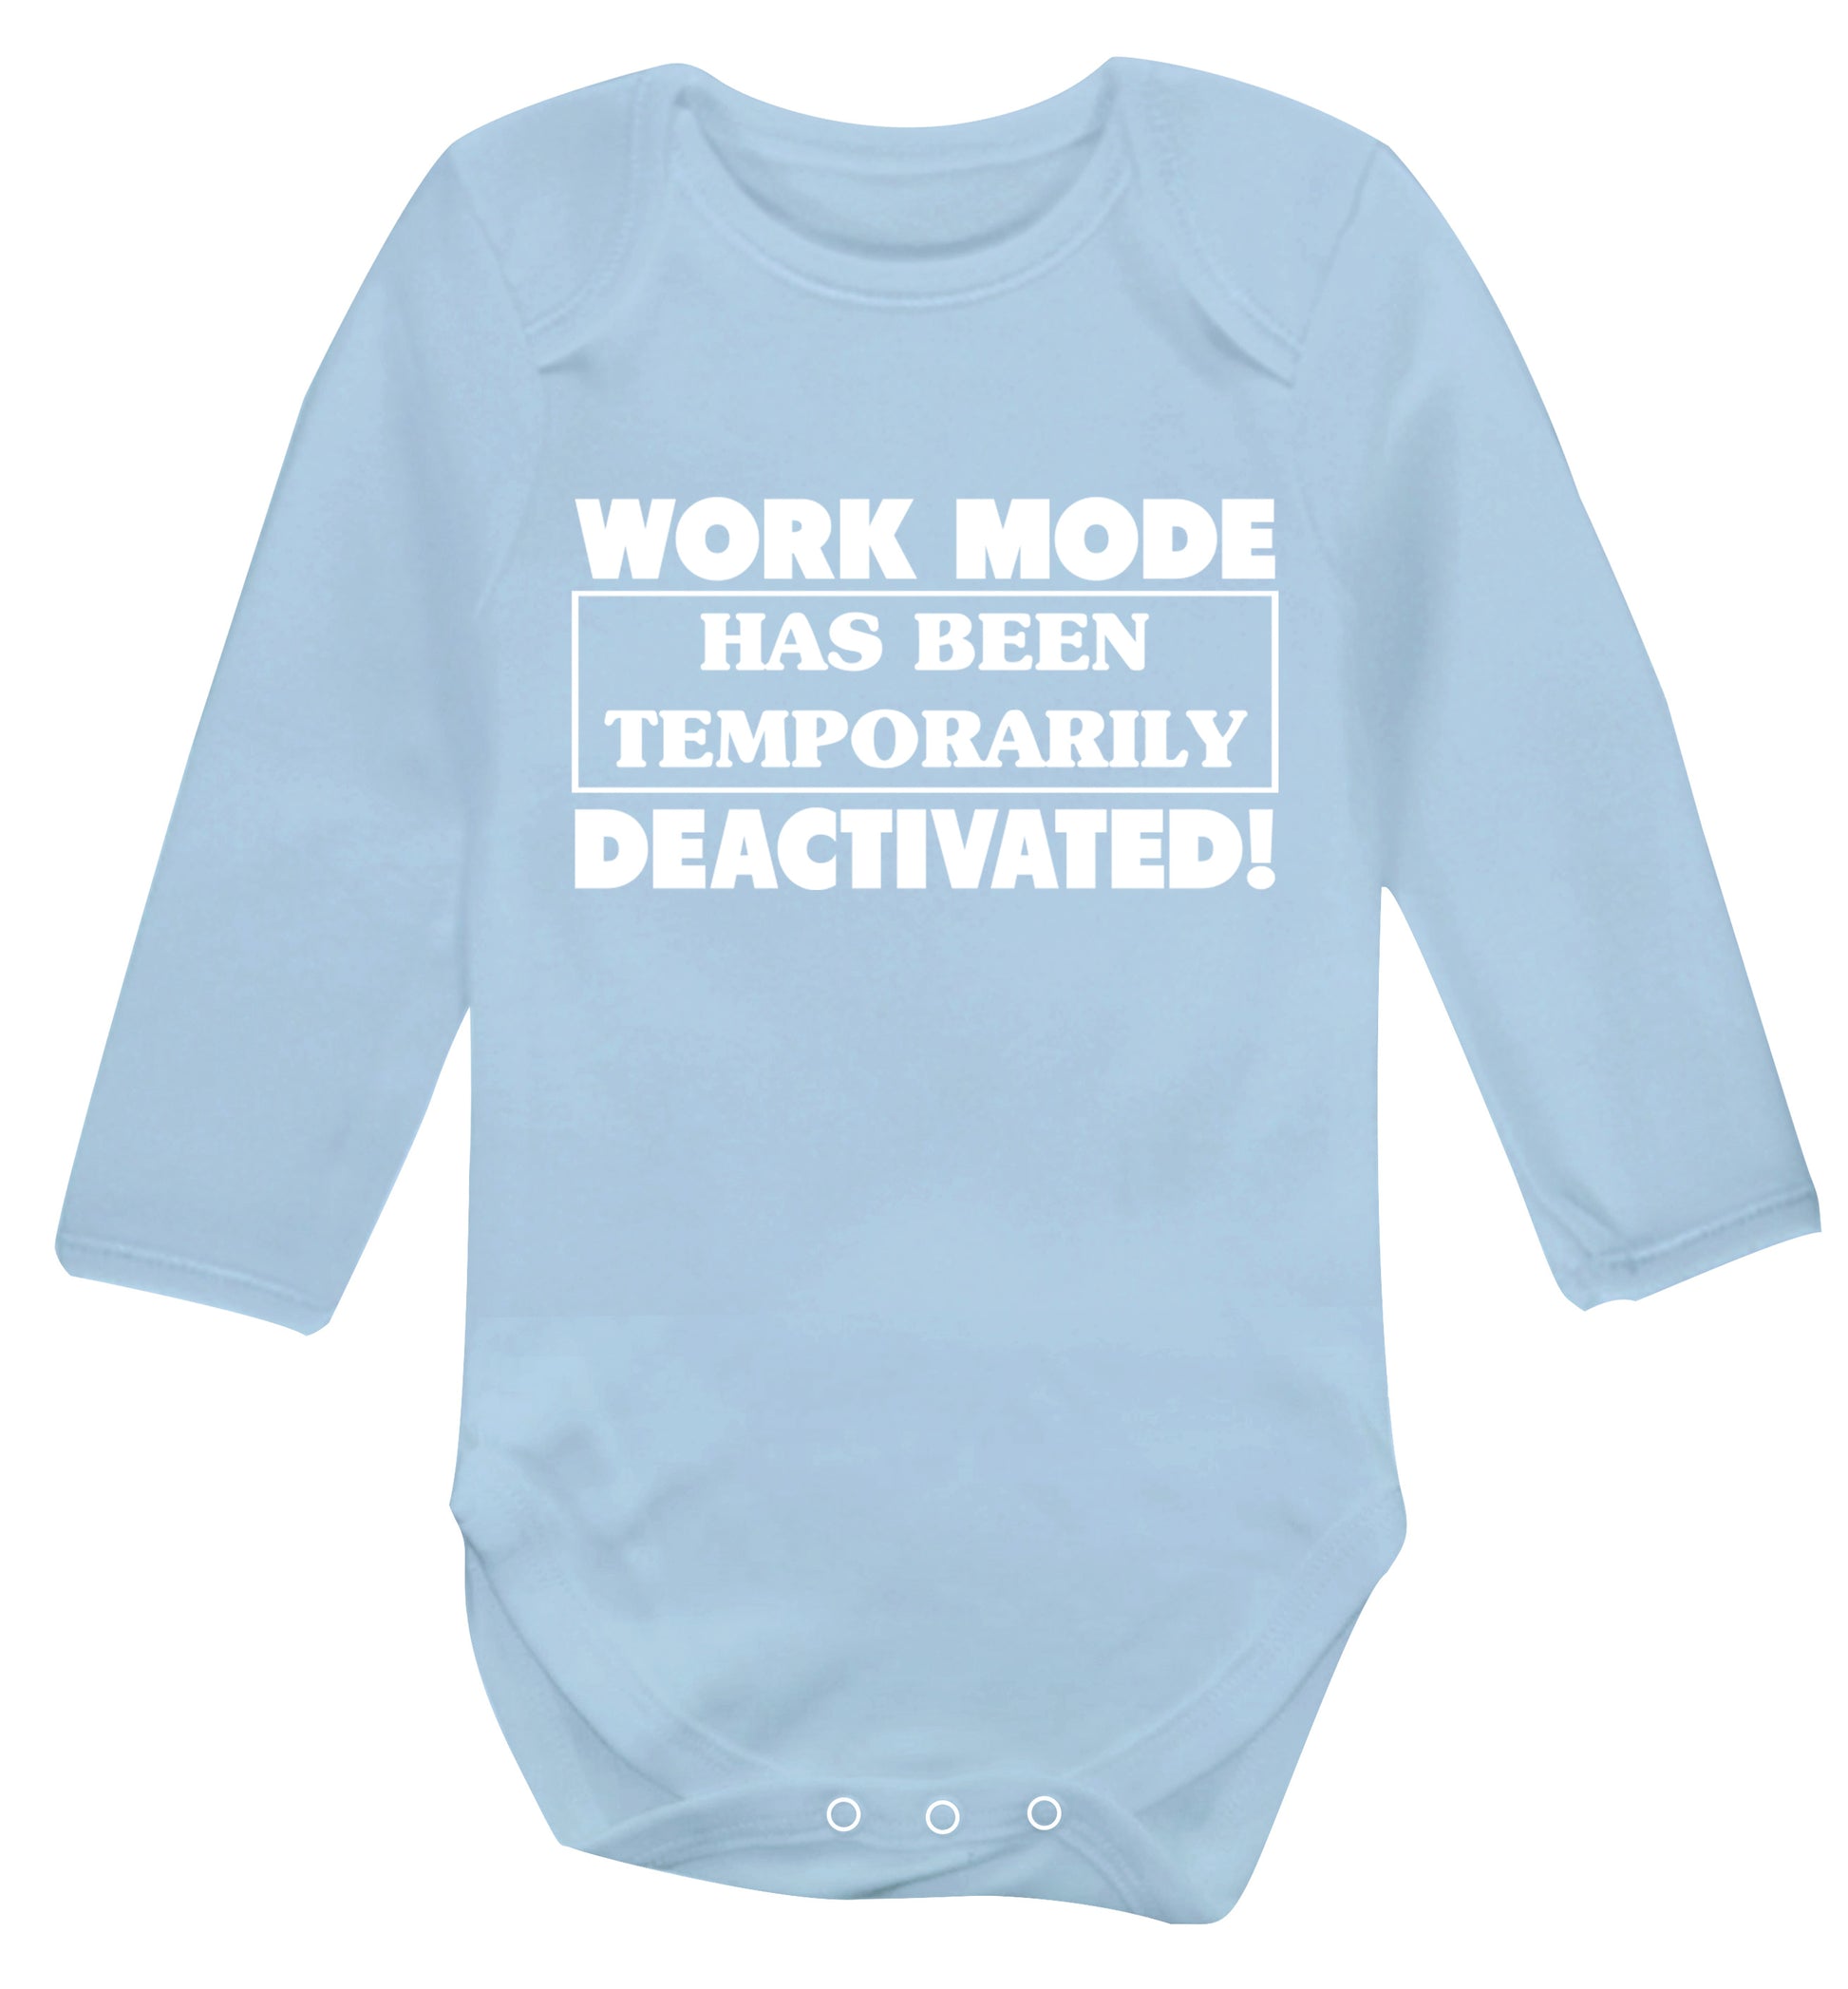 Work mode has now been temporarily deactivated Baby Vest long sleeved pale blue 6-12 months